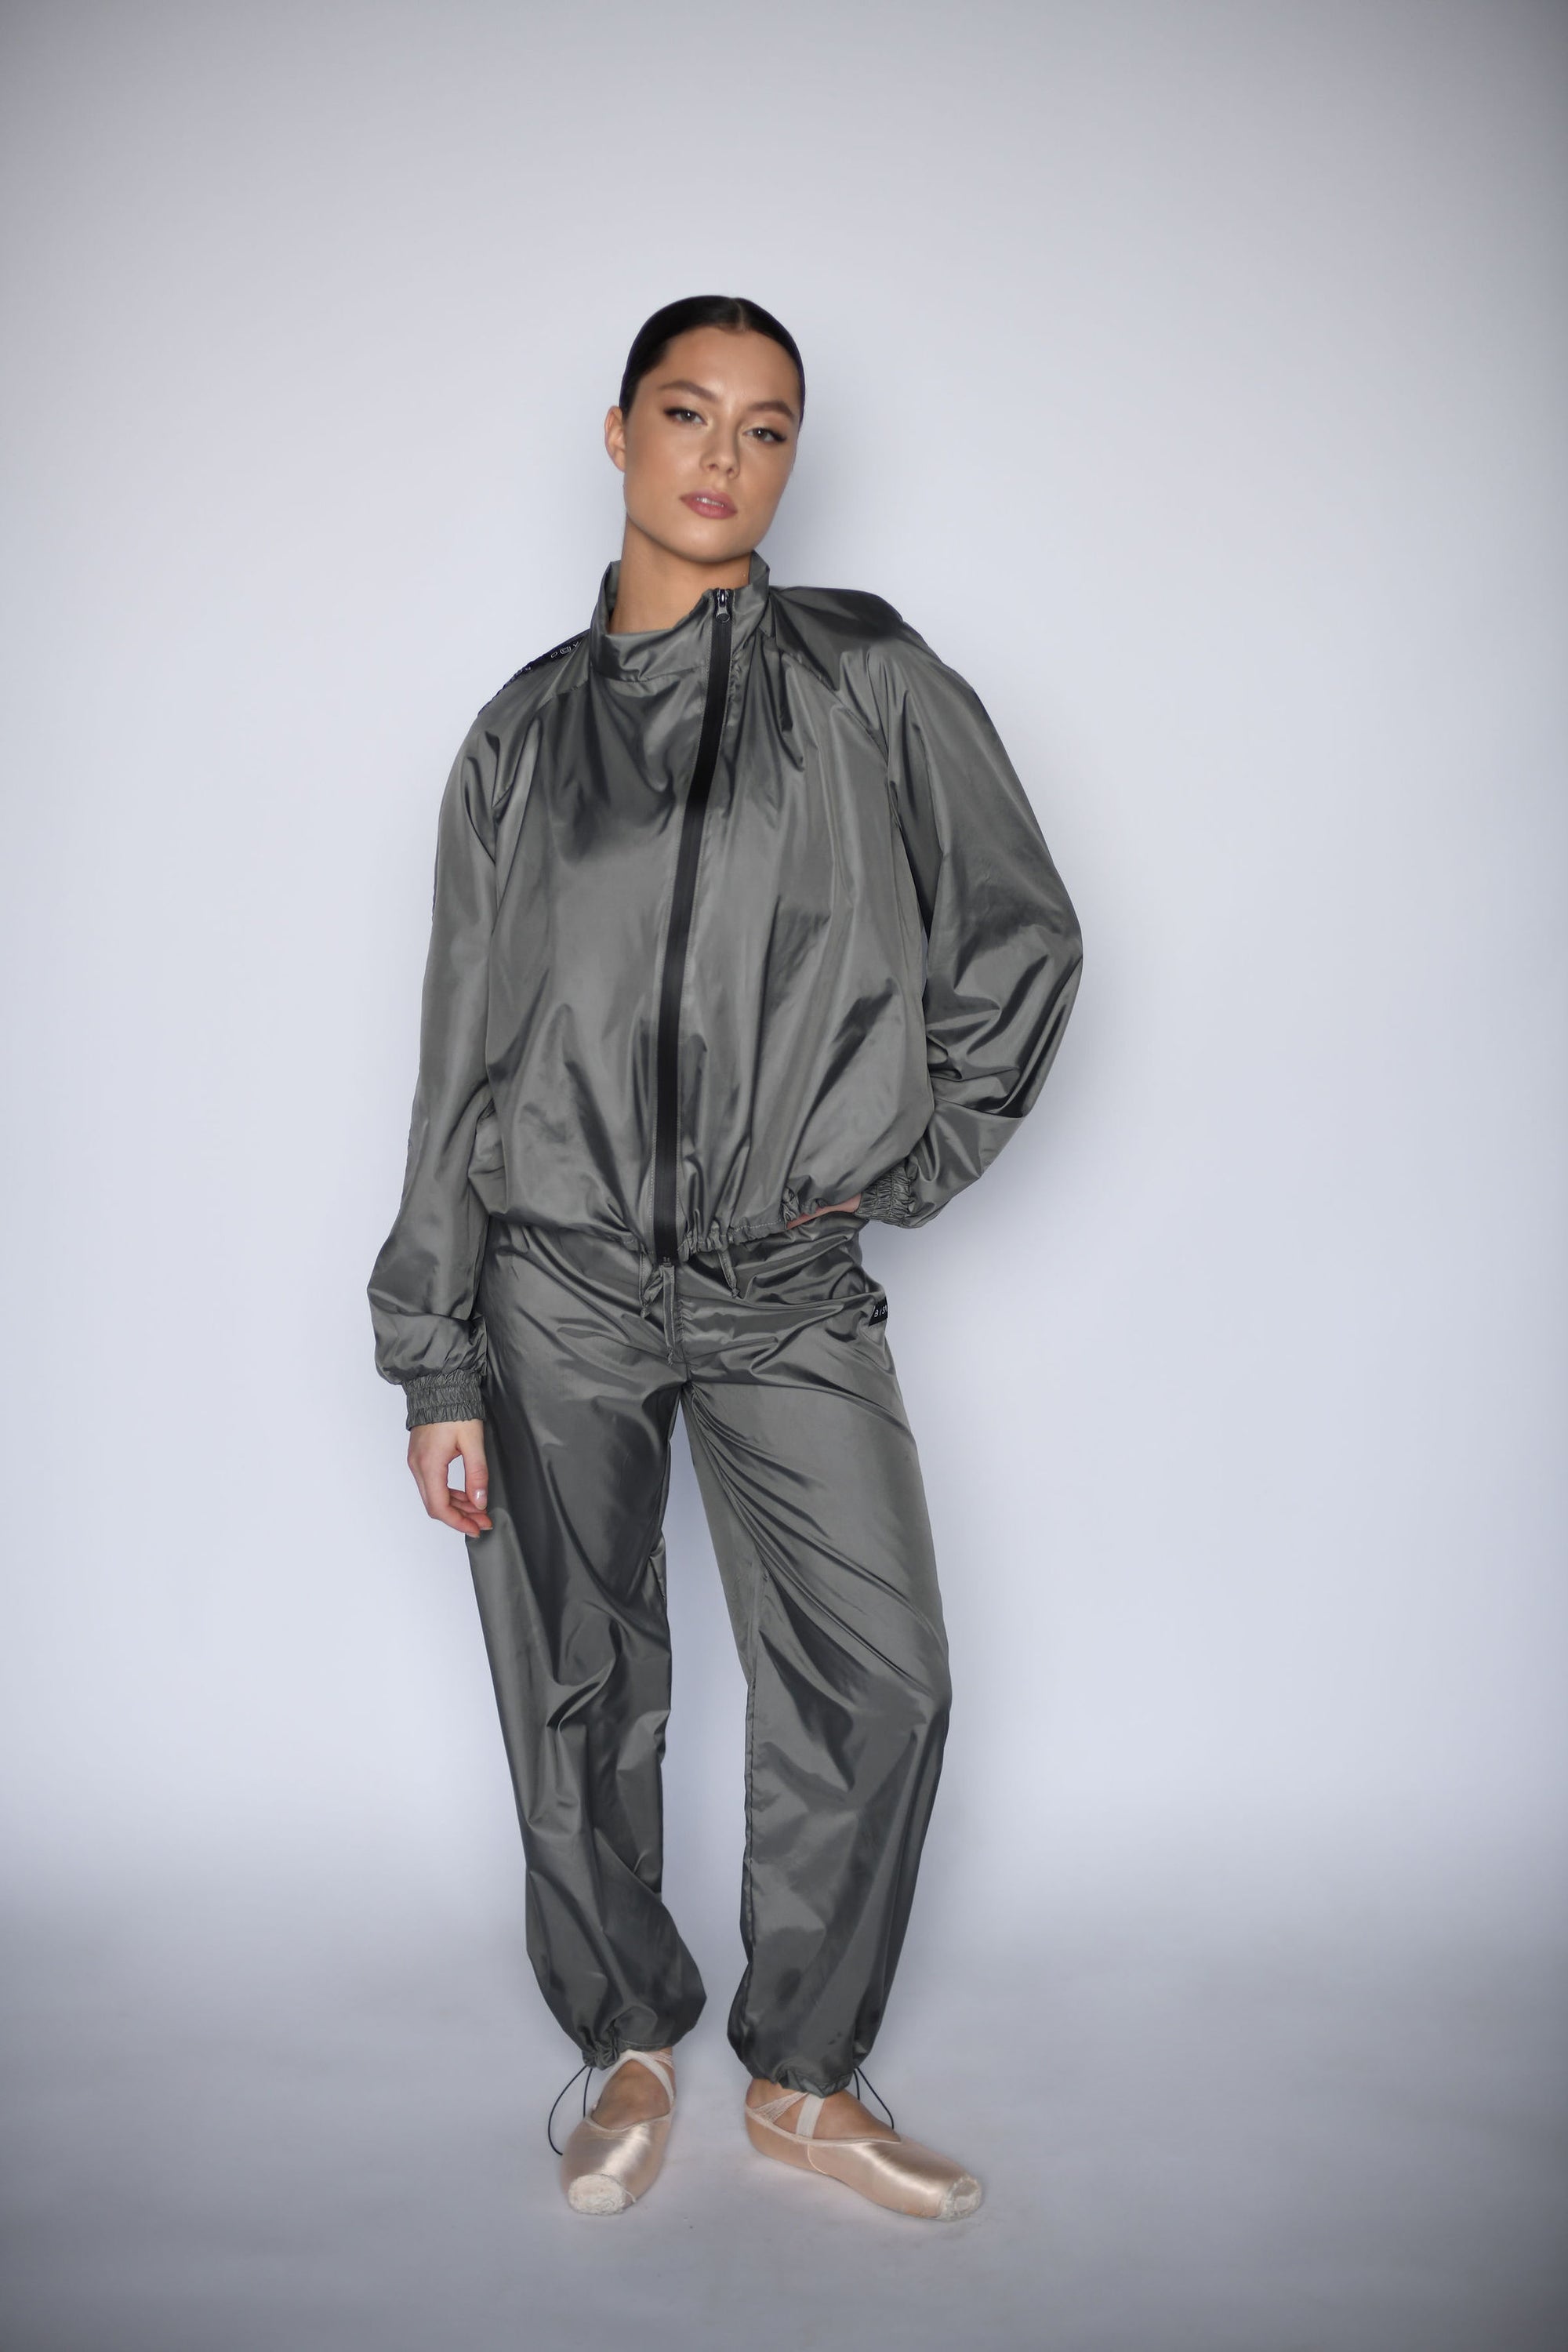 NEW URBAN SWAN COLLECTION S/S 23 | Dark concrete sports suit with pants